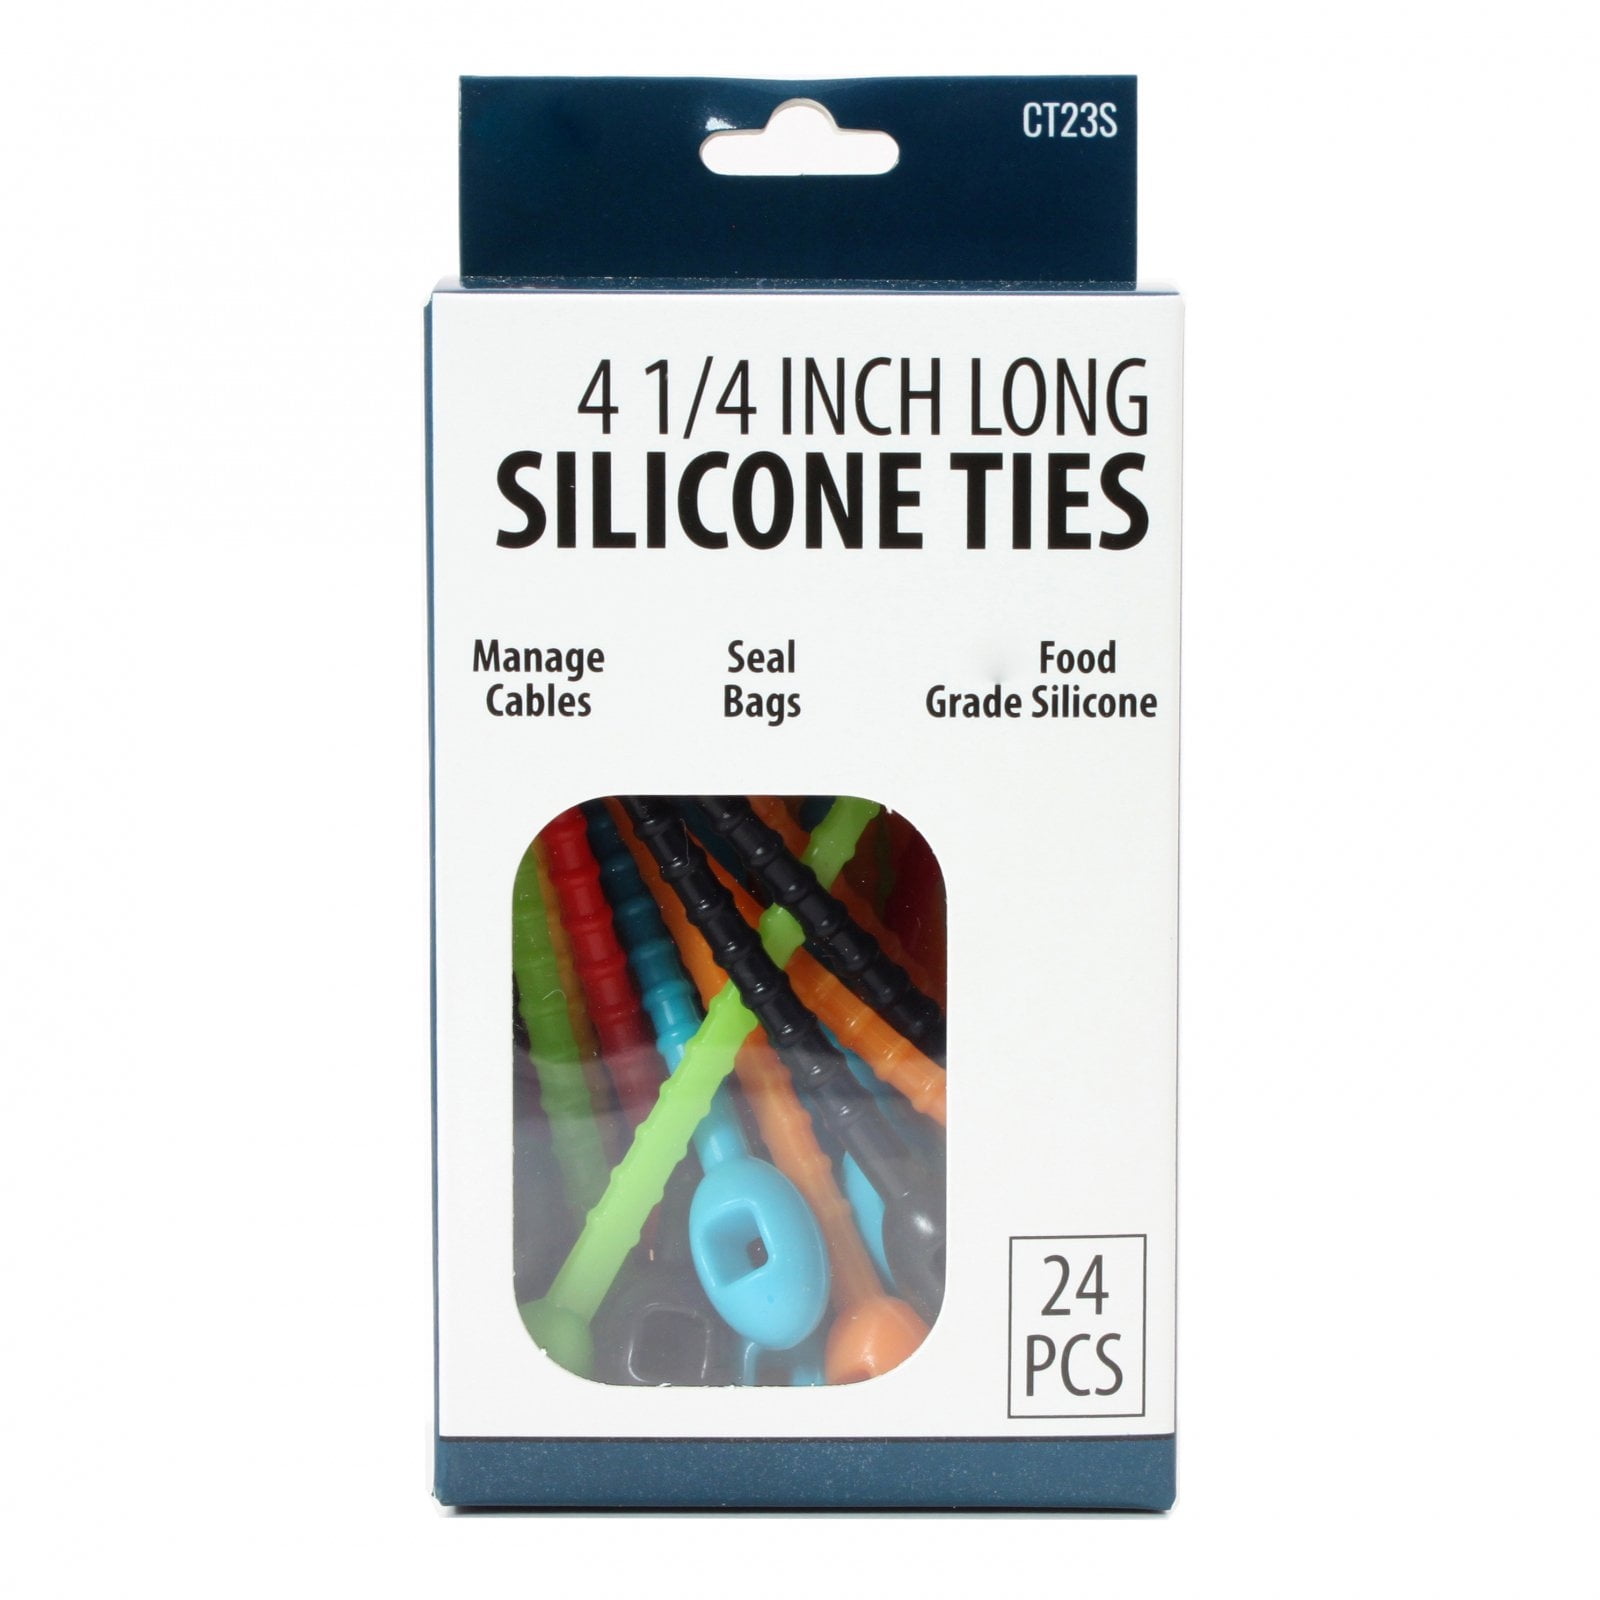 Re-Usable Zip Ties with Silicone Gripper – Gorsuch Performance Solutions